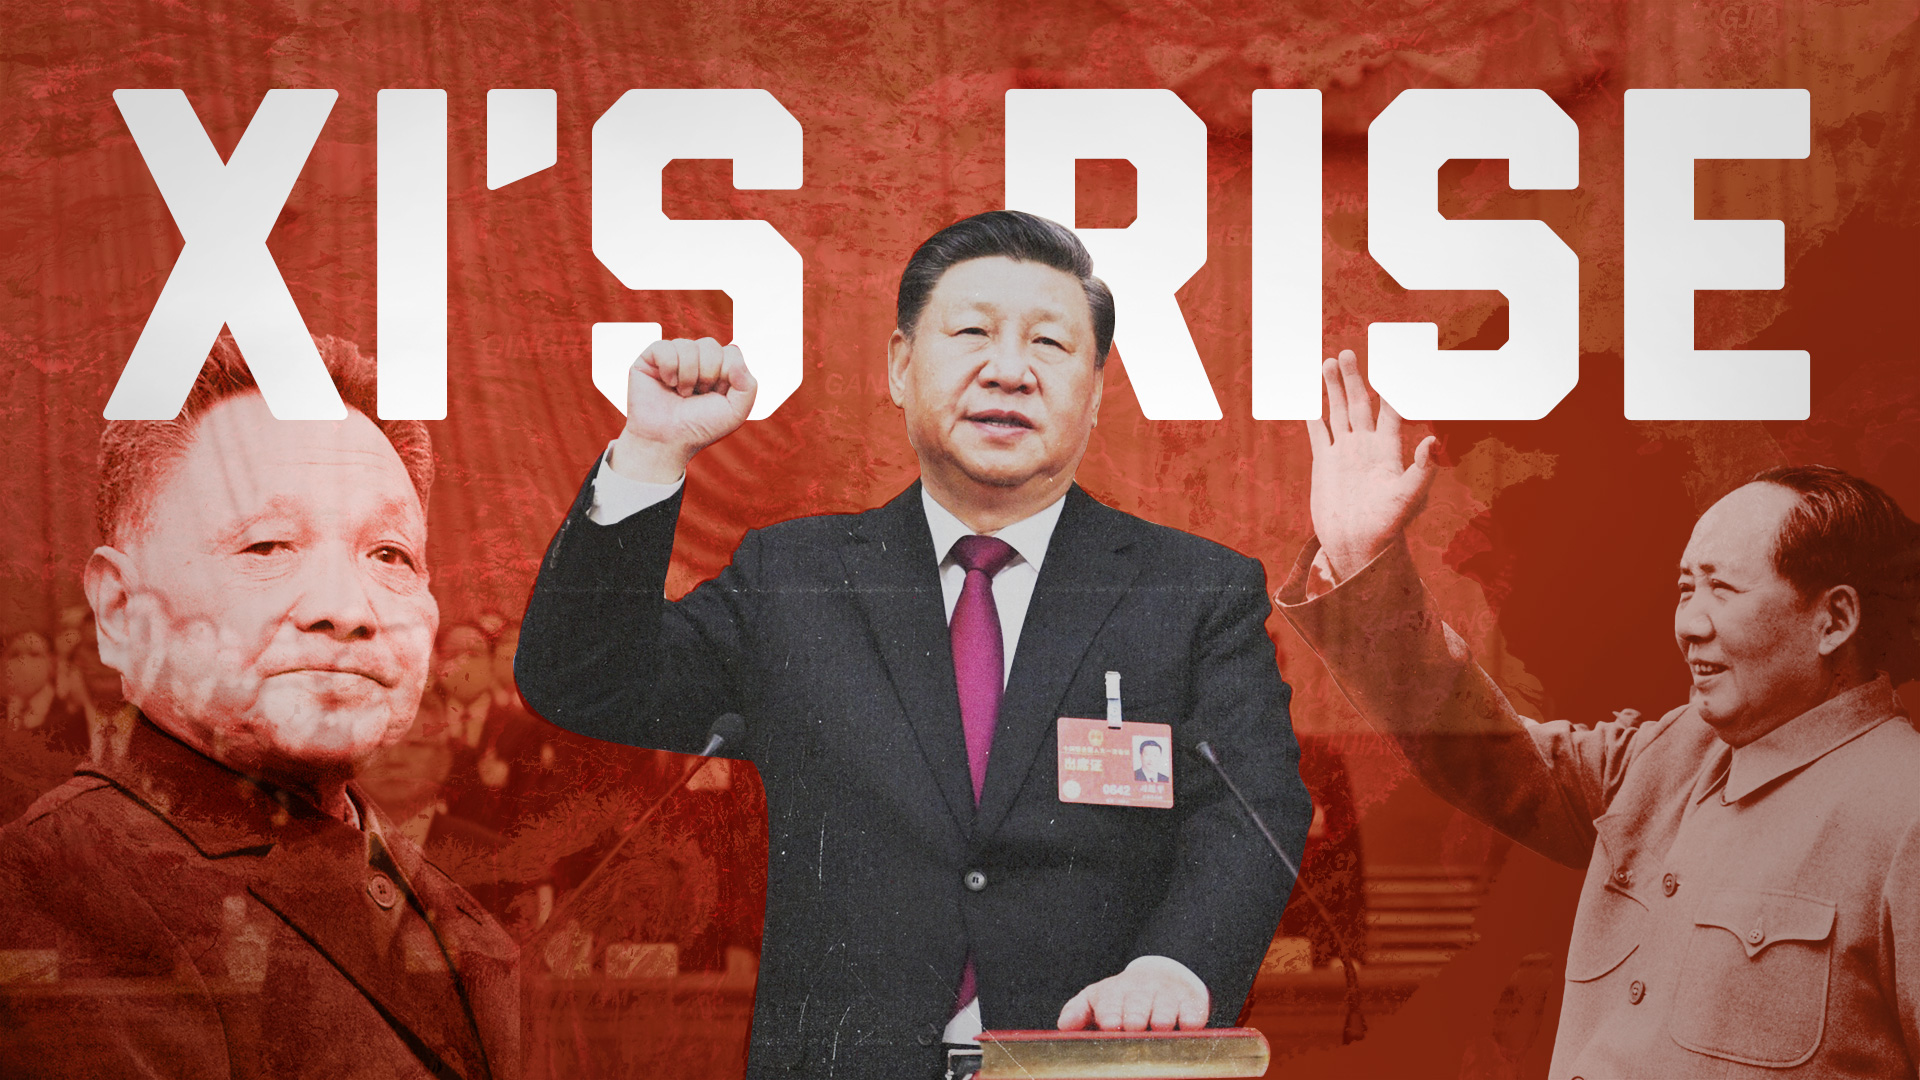 Chinese leader Xi Jinping is pictured raising a fist in a party salute, with images of his family and the word’s “Xi’s rise” in graphics behind him. 